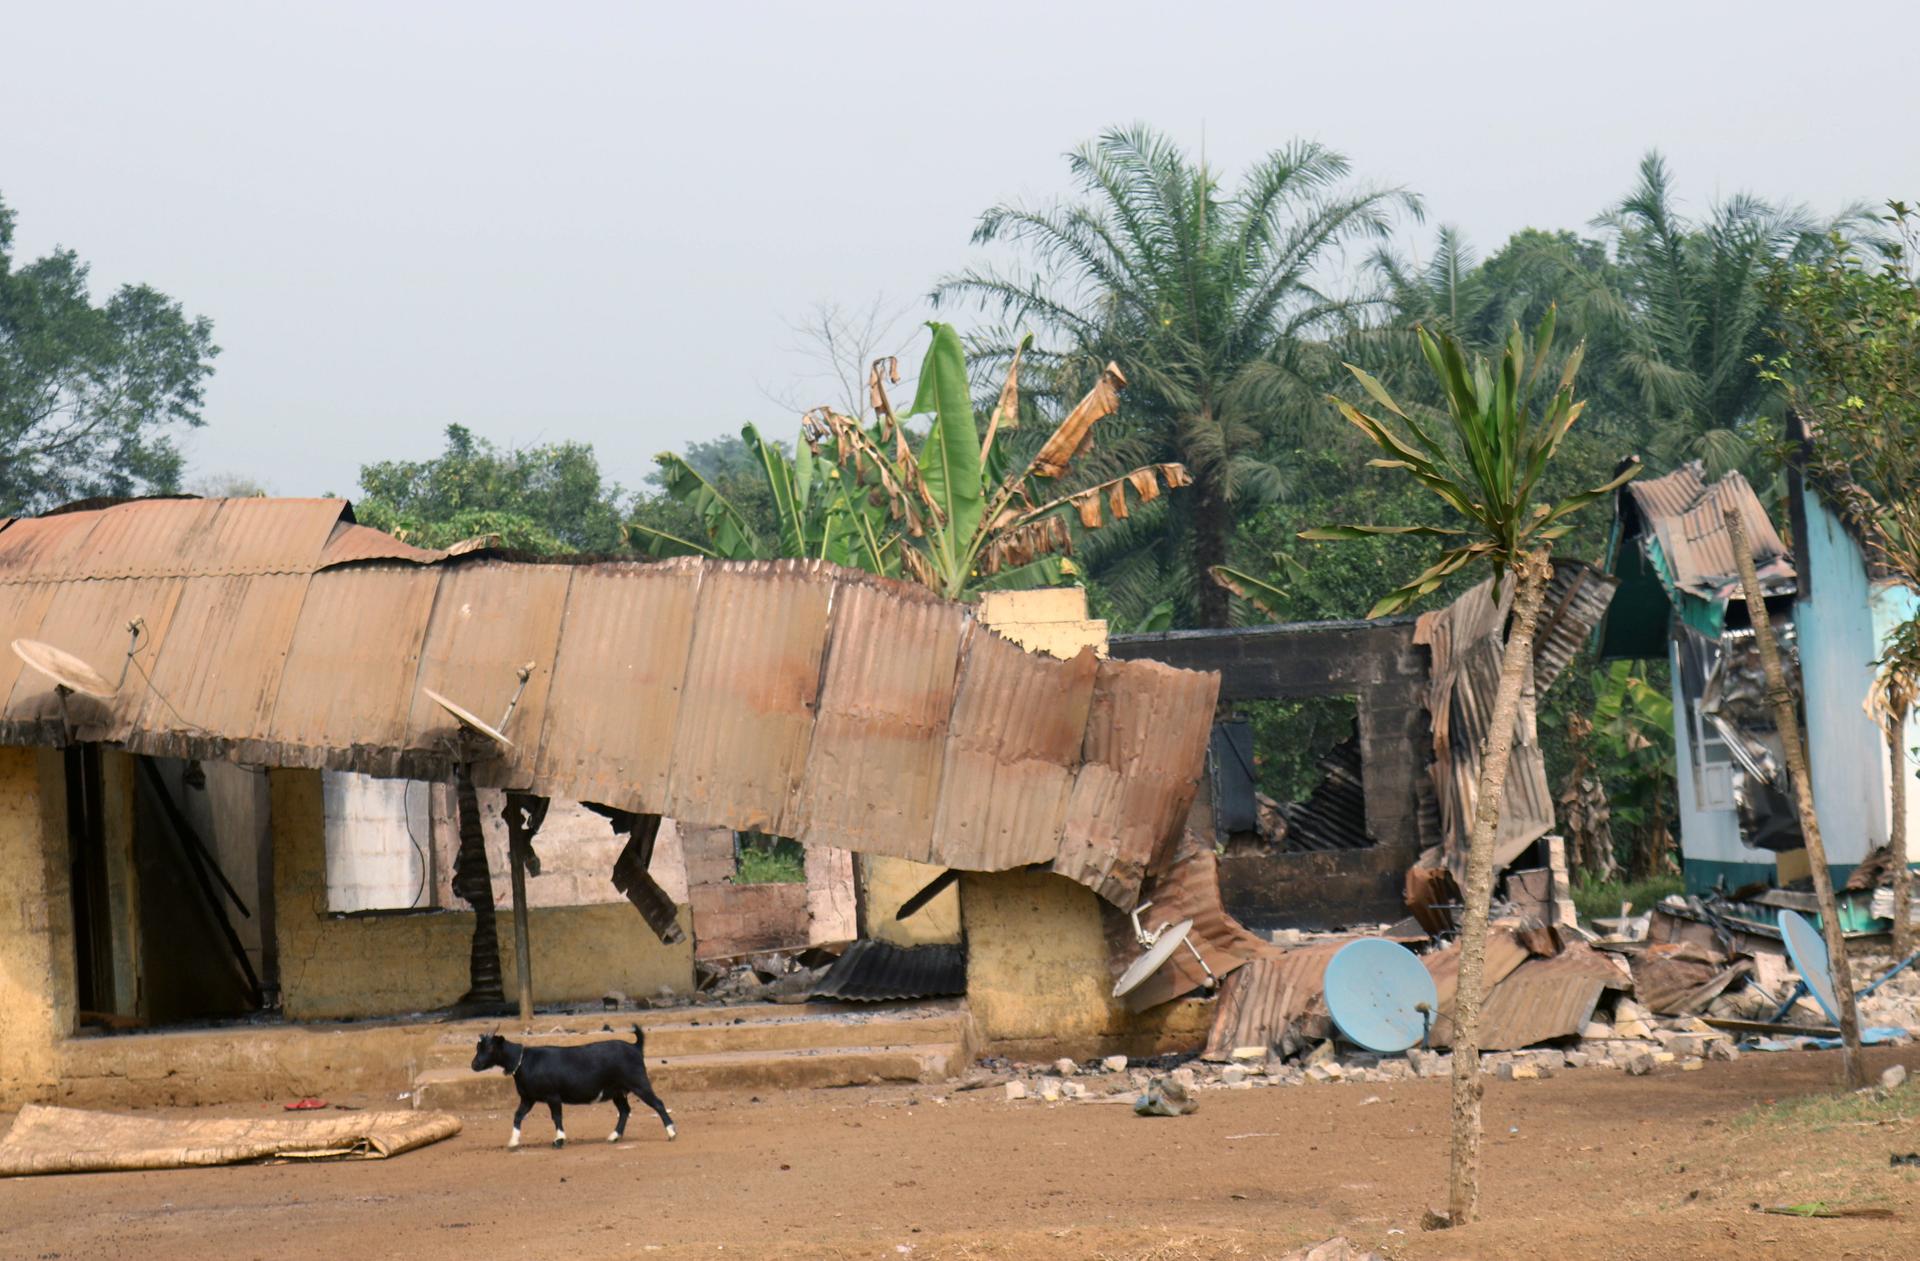 A goat walks past burned and damaged buildings in Kembong, south-west region of Cameroon Dec. 29, 2017.